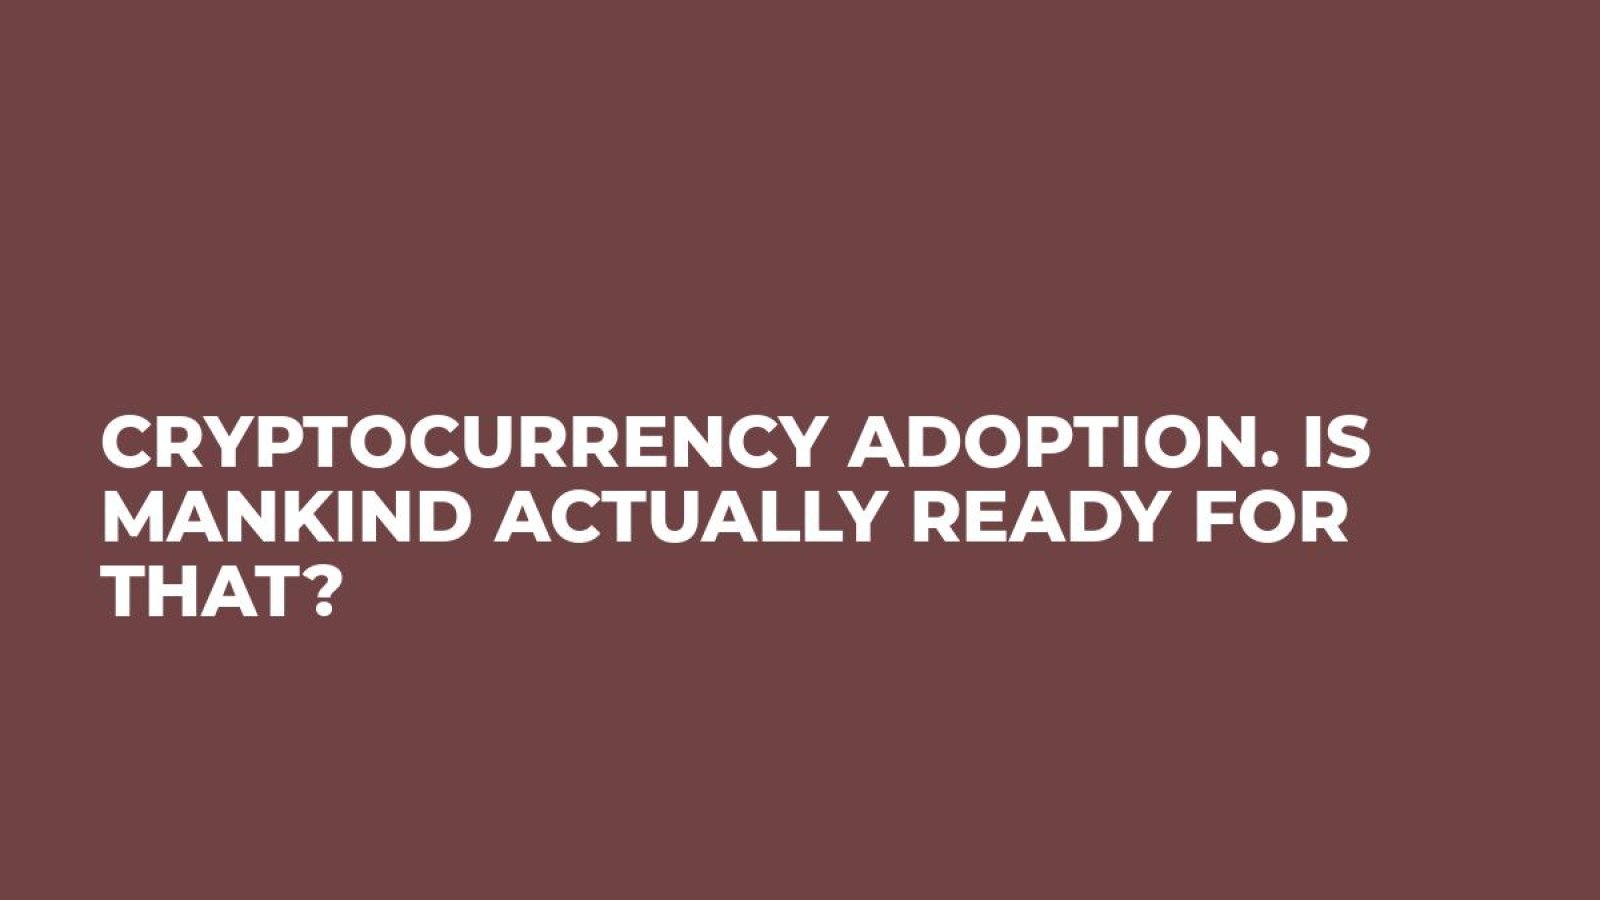 Cryptocurrency adoption. Is mankind actually ready for that?